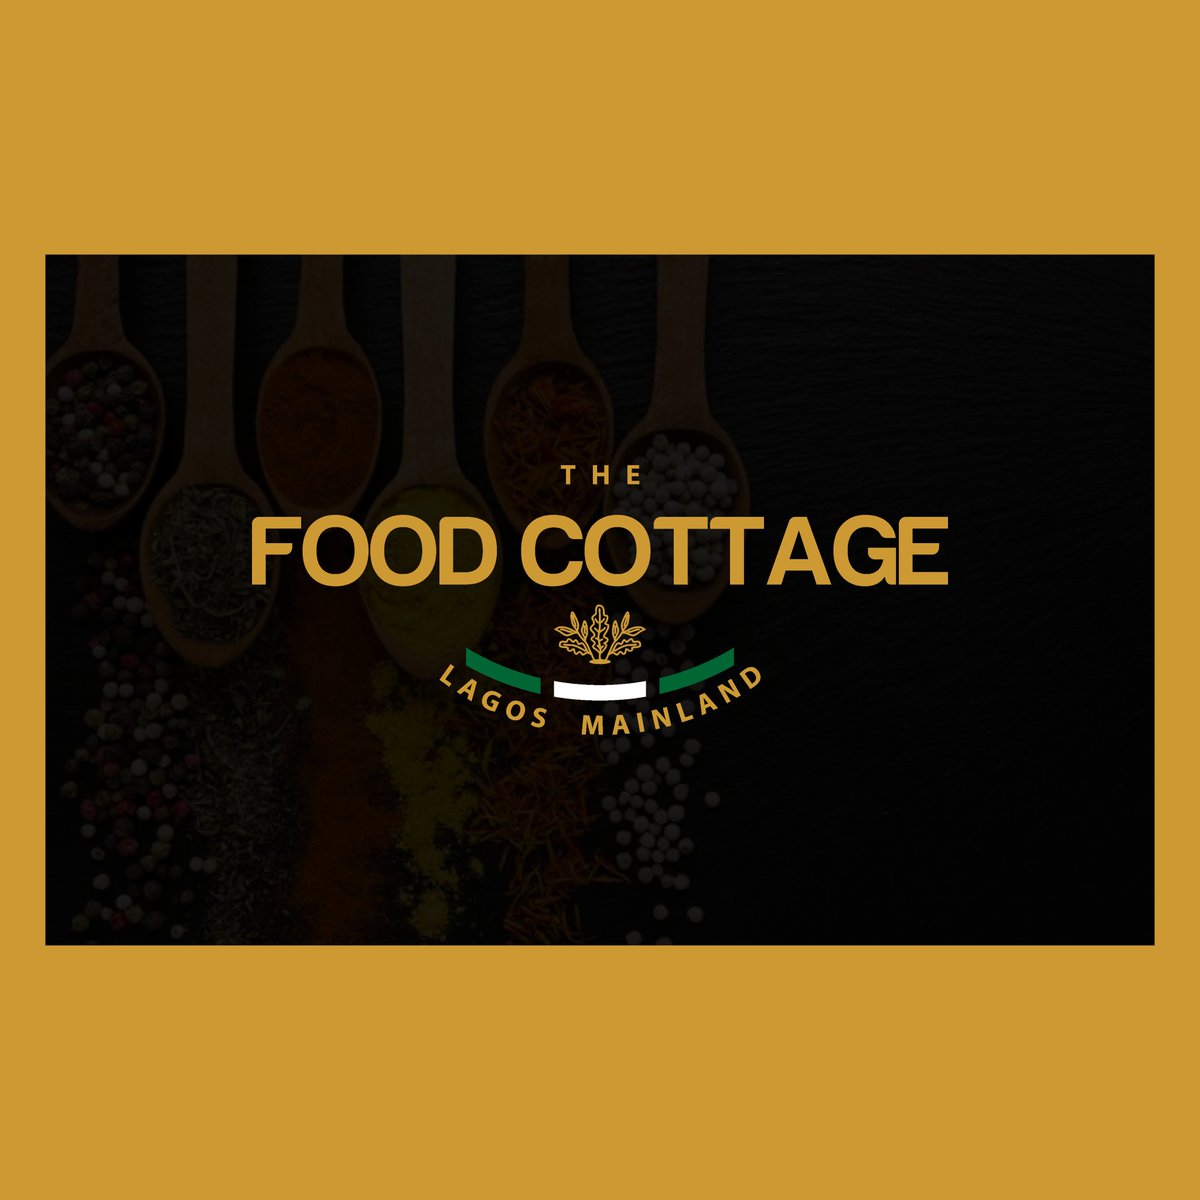 THE FOOD COTTAGEJust a food brand that makes you want to go on a date, relax, eat and drink a fine wine.